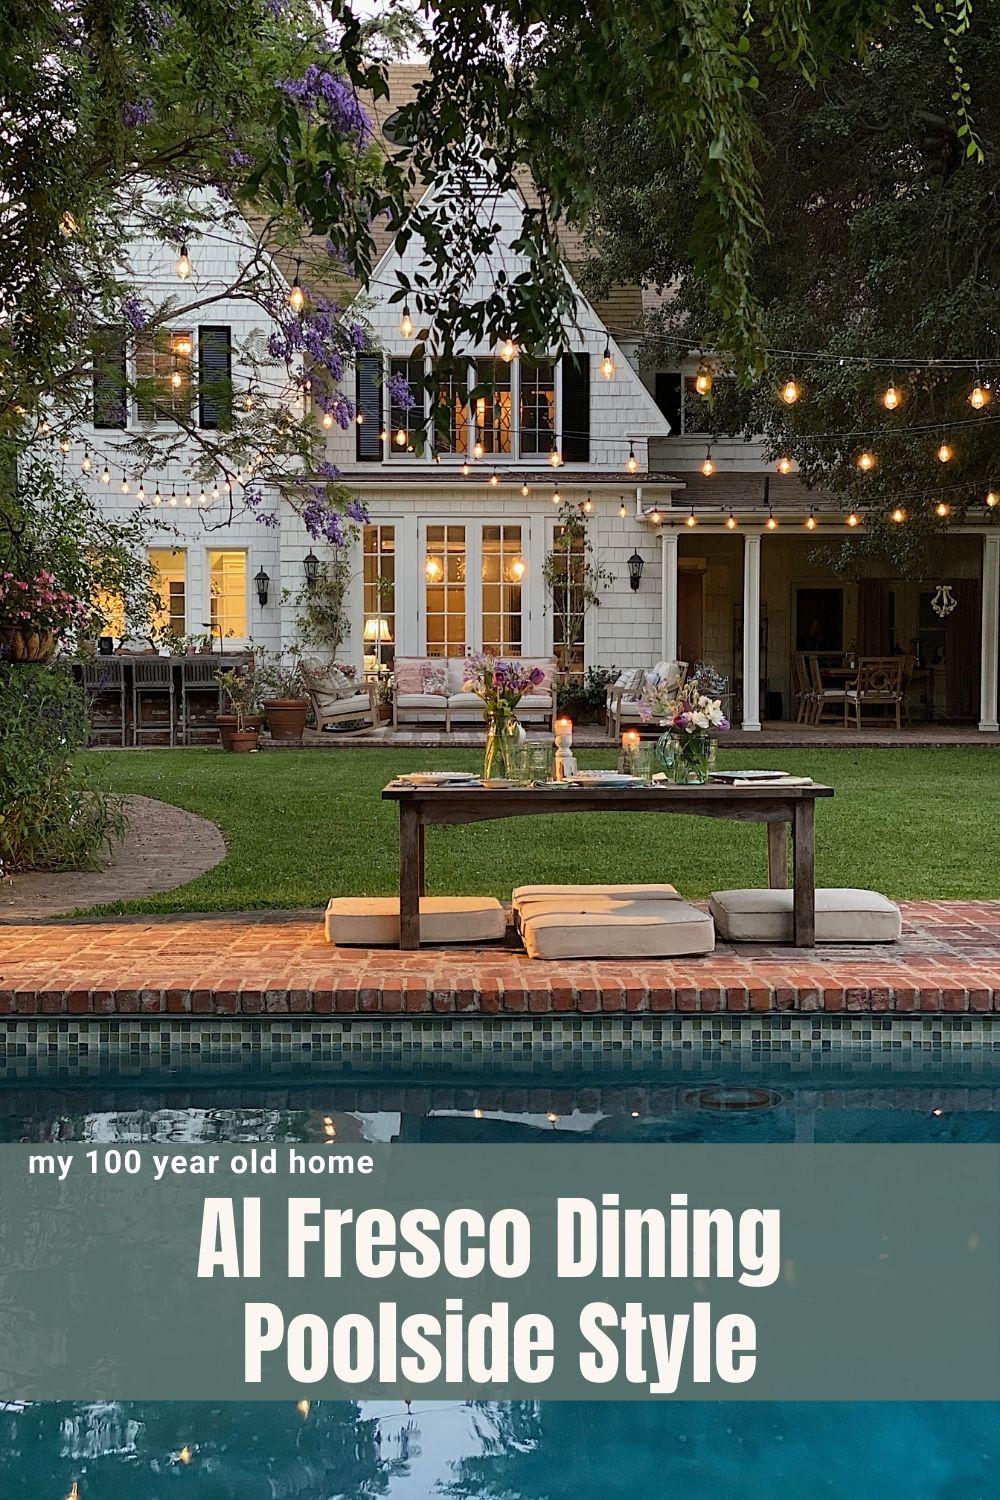 Is anything better than al fresco dining poolside style? I don't think so. I love this casual summer dining idea!